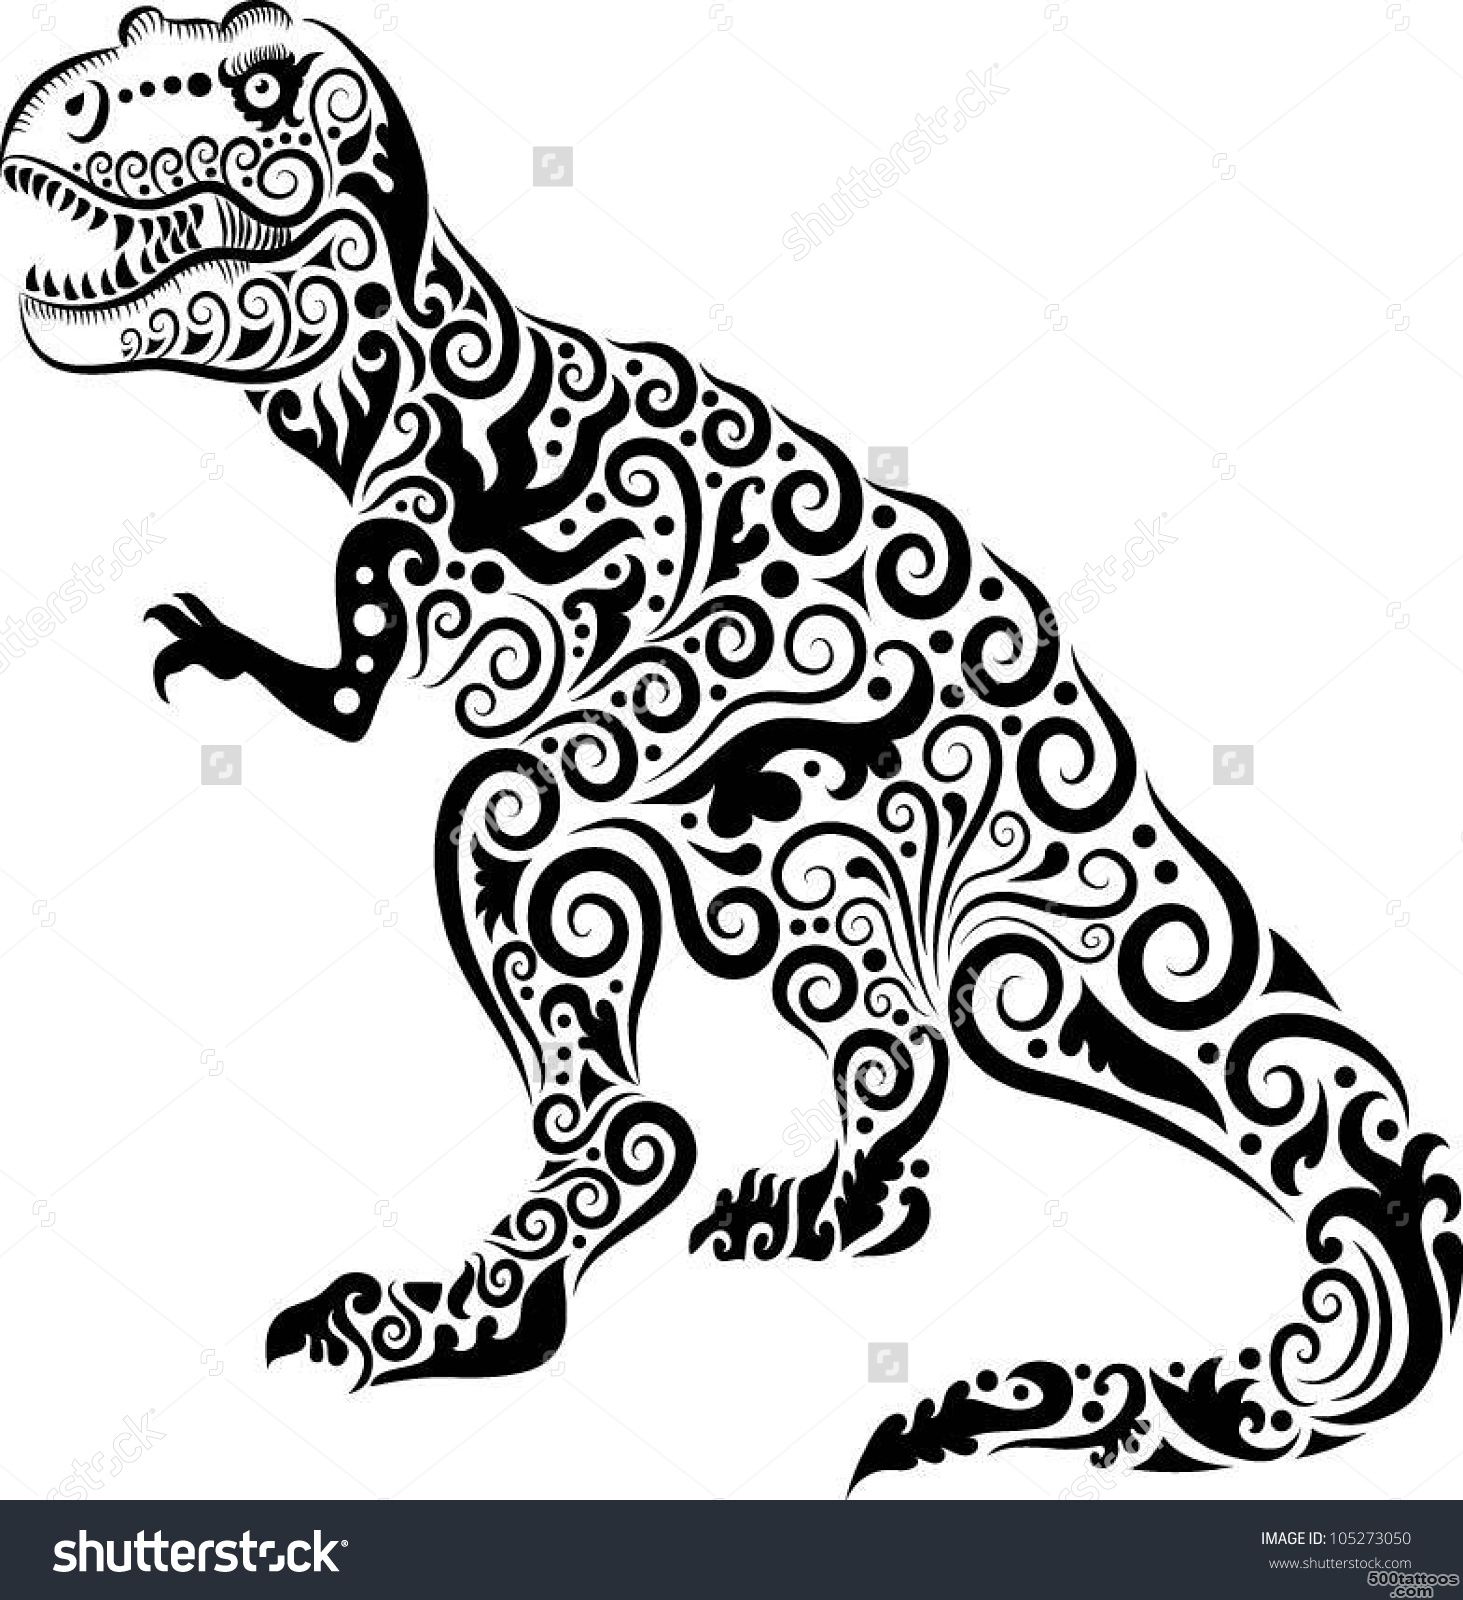 Dinosaur Decorative Ornament. Animal Drawing With Floral Ornament ..._23